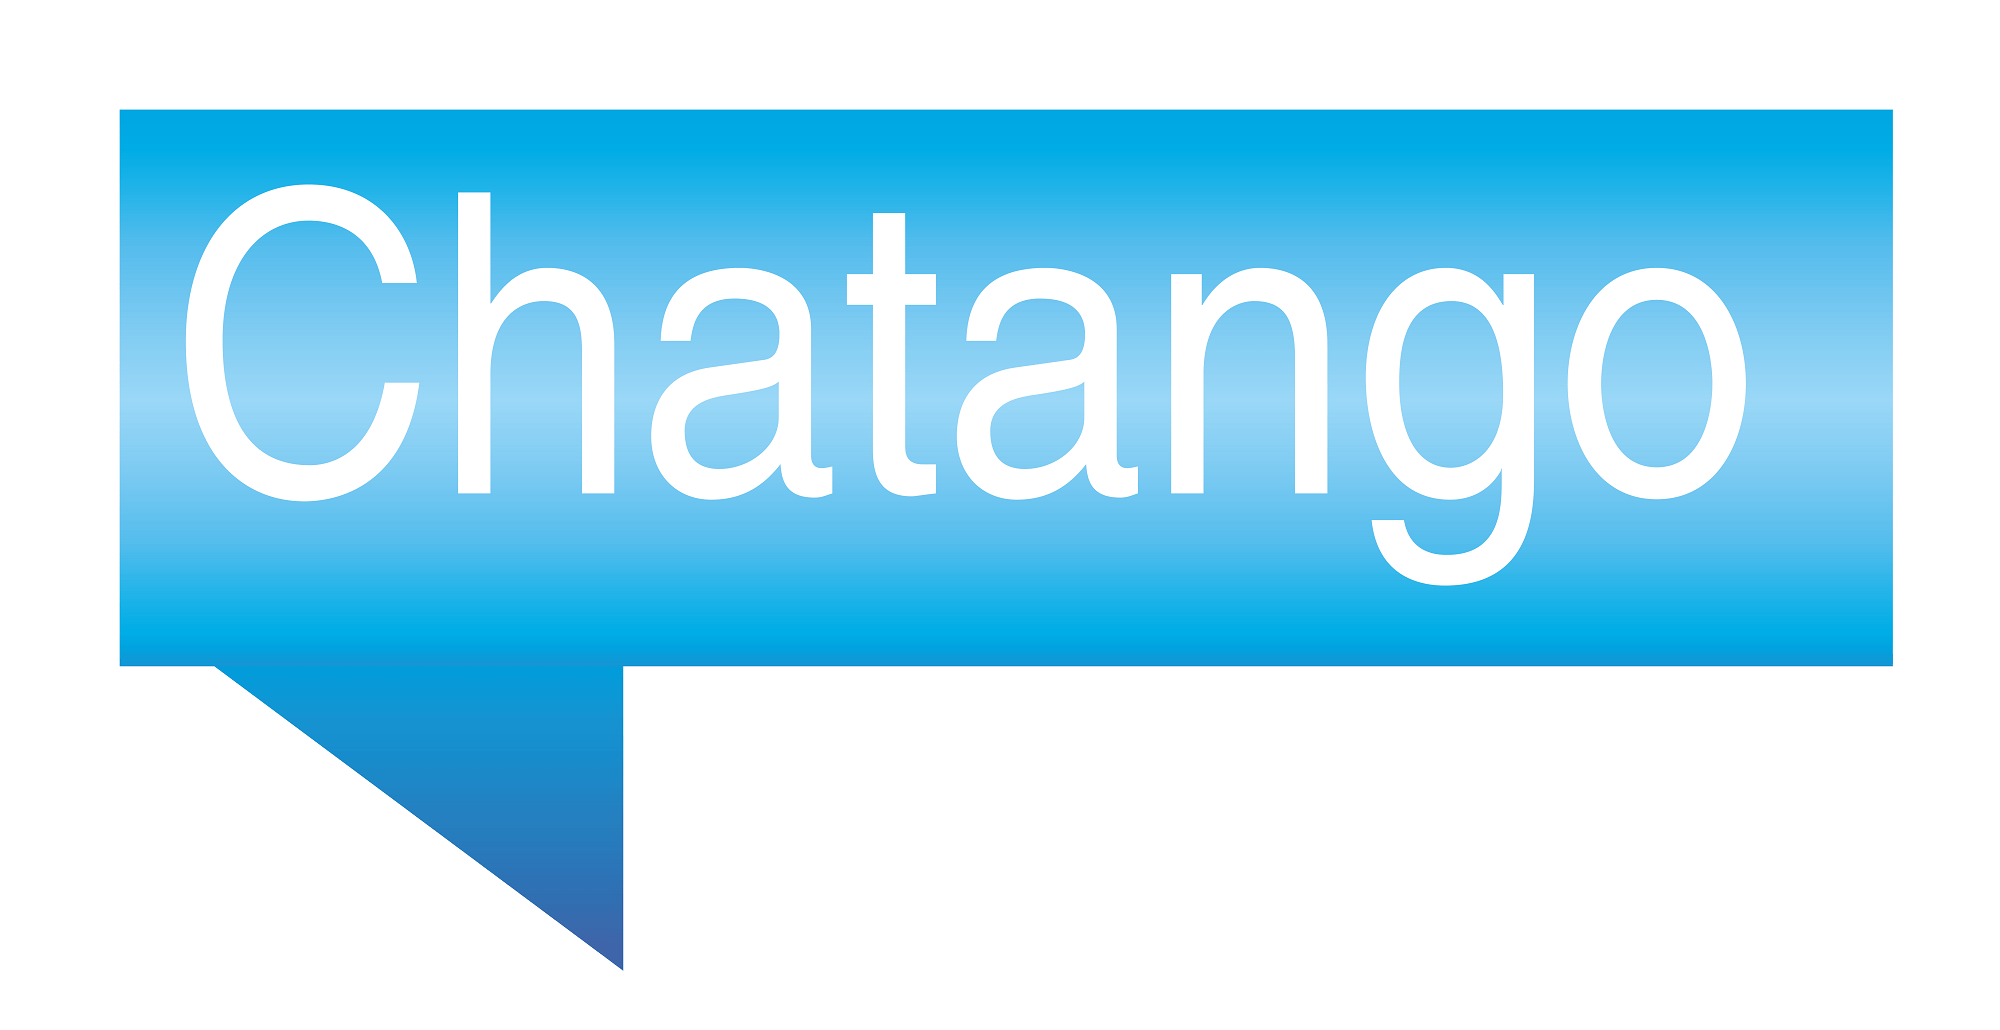 Room chatango chat Free General